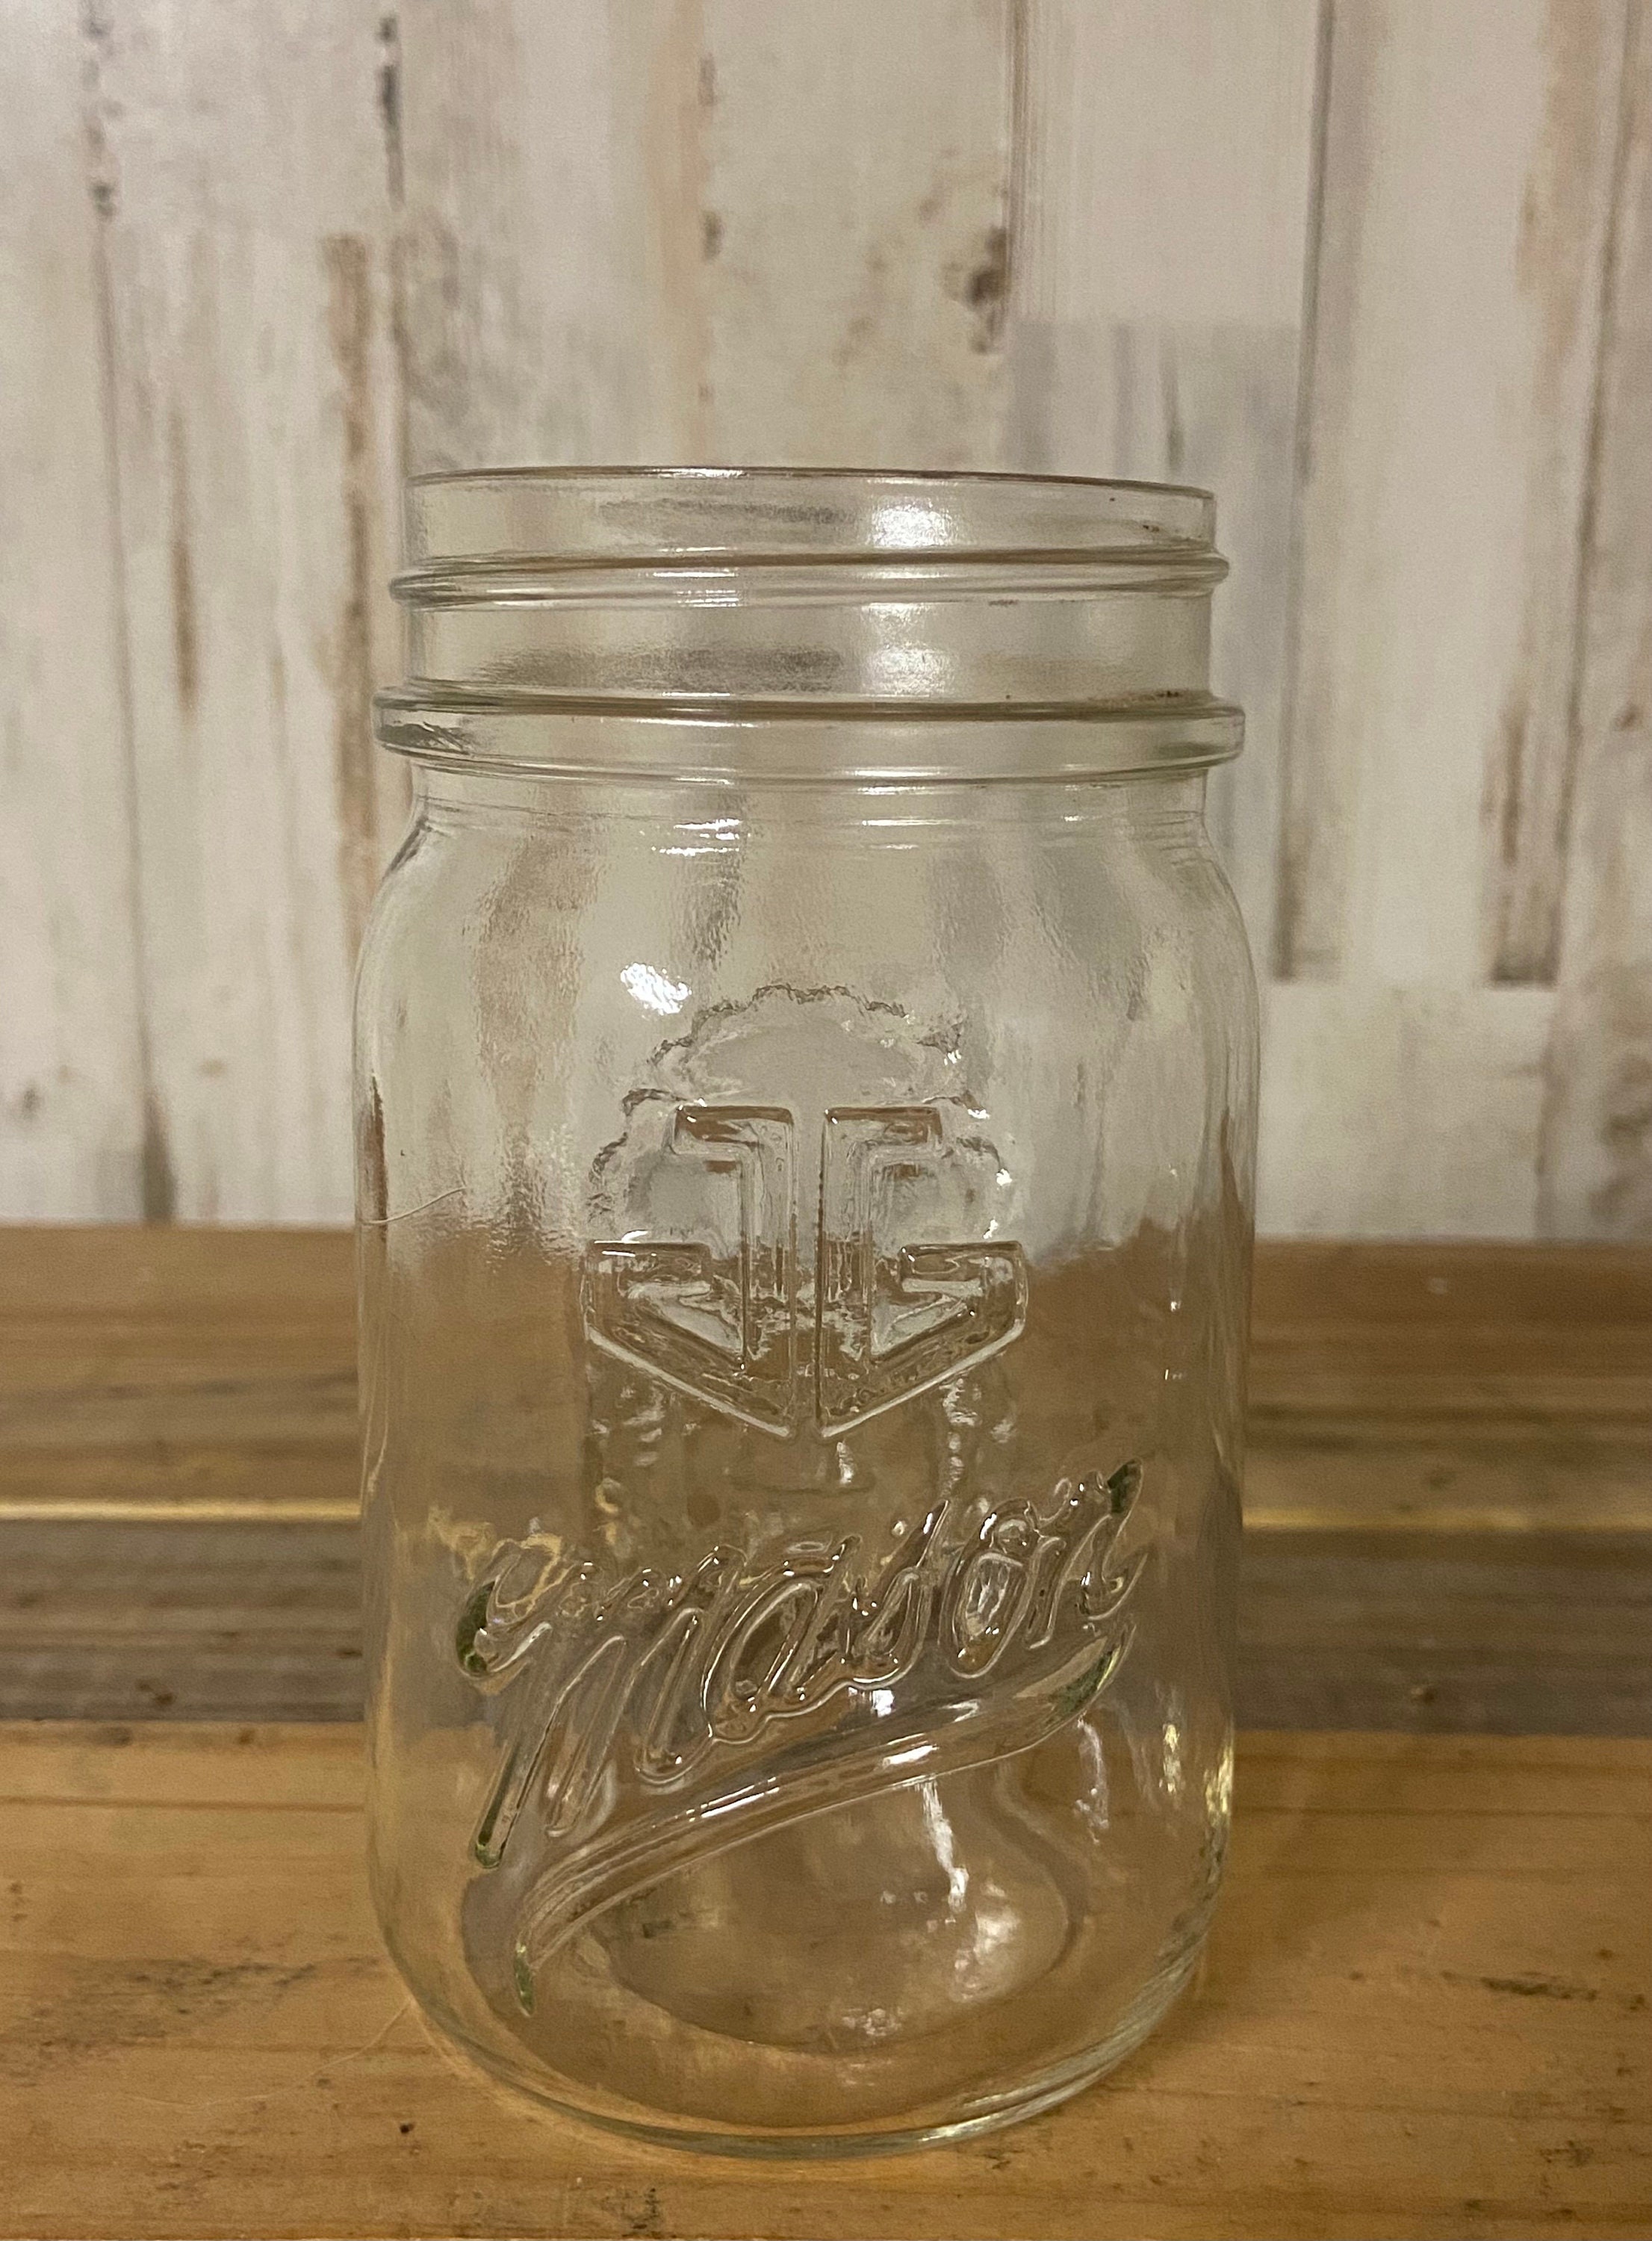 Set of 6 8 Oz Soy Mason Jar Candles / Soy Candles / Handpoured Candles /  Multiple Scents / Container Candles / Farmhouse Decor 